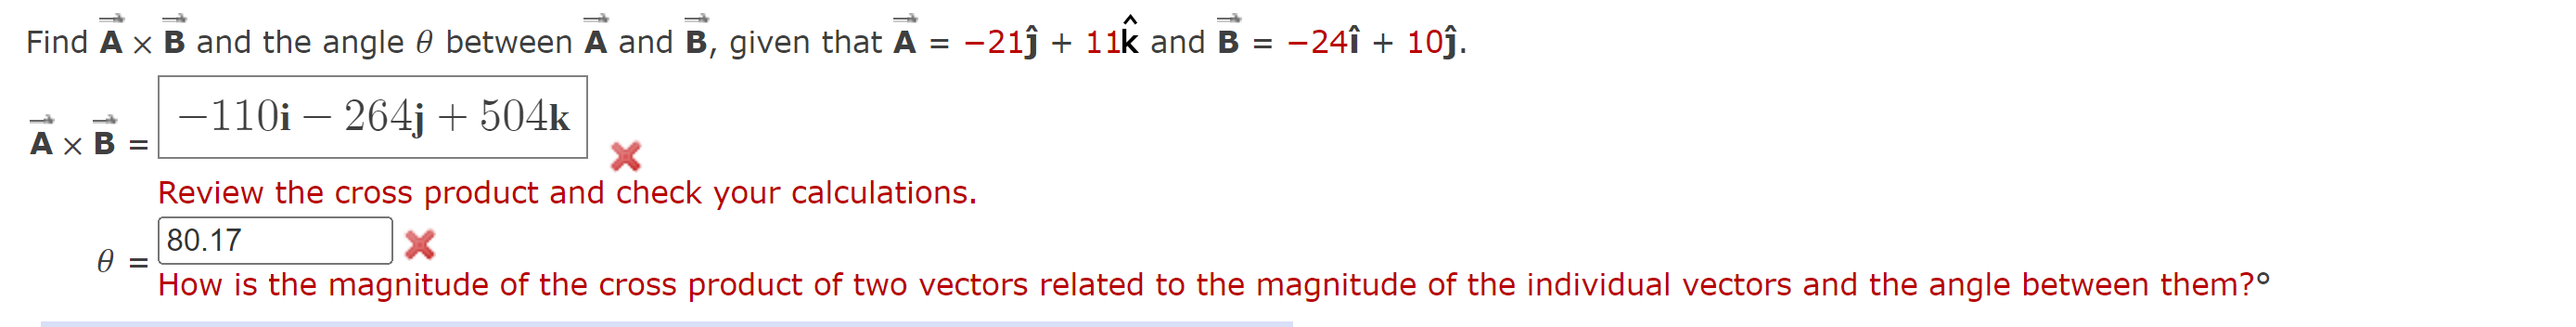 Find A x B and the angle between A and B, given that A = 21 + 11k and B = 110i  264j + 504k X Review the